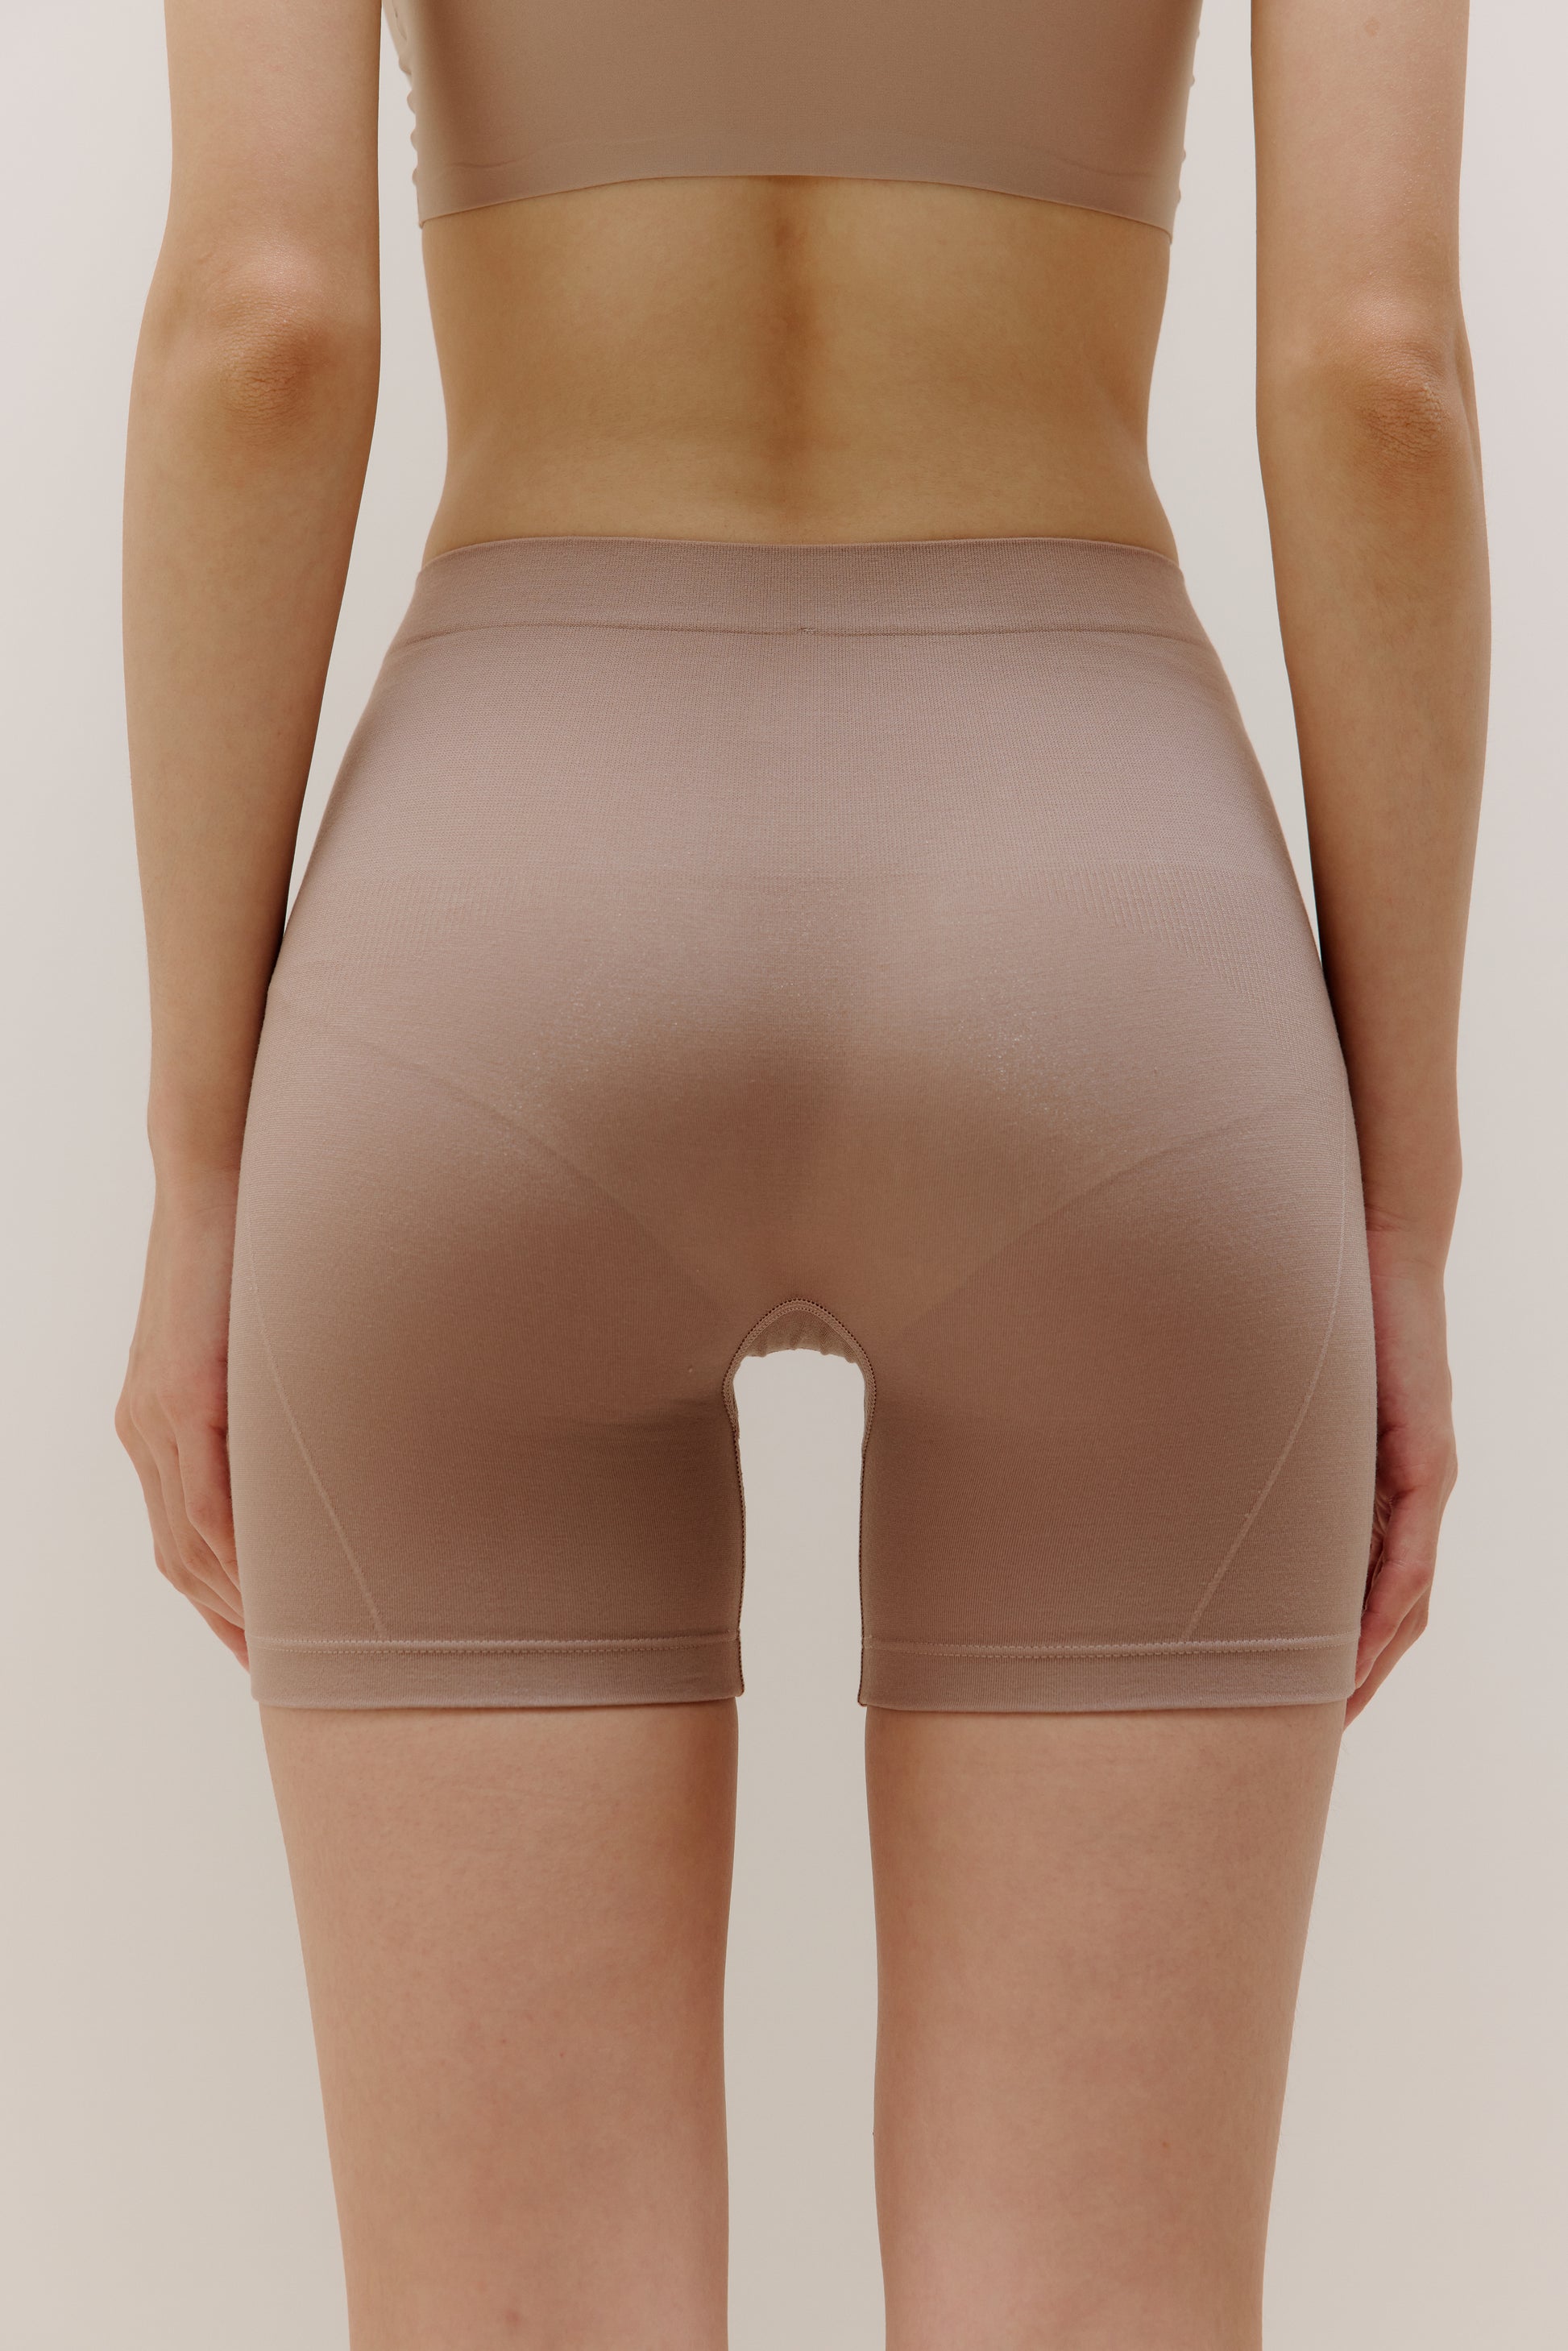 Spanx Everyday Seamless Shaping High-Waisted Shorts, £35.00